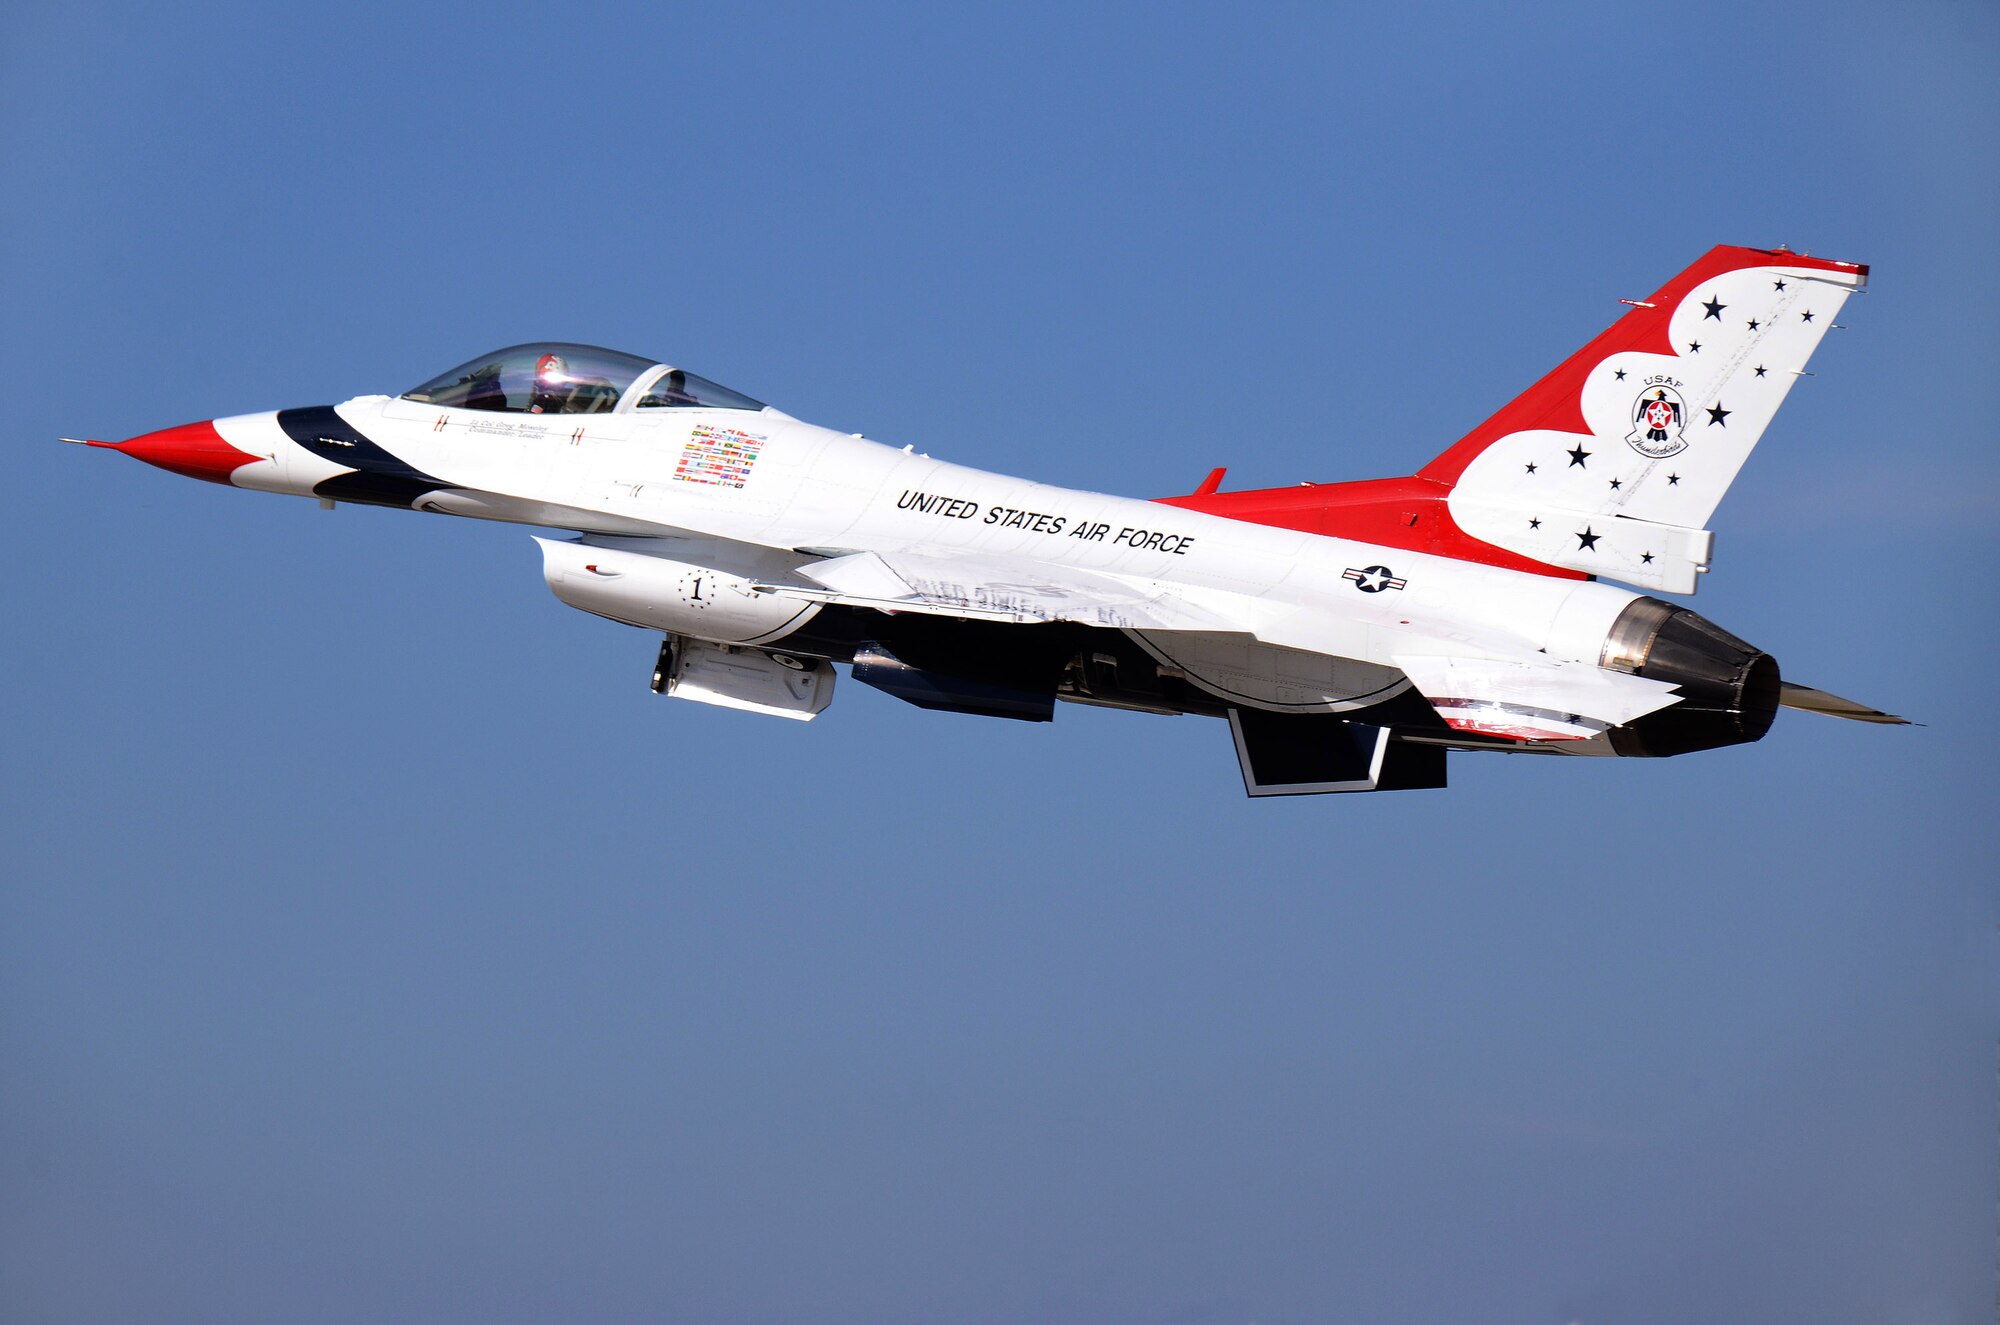 Thunderbird #1, Lt. Col. Greg Moseley, departs Dobbins Air Reserve Base for the Wings Over North Georgia air show Oct. 18, 2014. The USAF Air Demonstration Squadron Thunderbirds are using Dobbins as their base of operations for their performances at the air show this weekend at the Russell Regional Airport in Rome, Georgia. (U.S. Air Force photo/ Brad Fallin/Released)